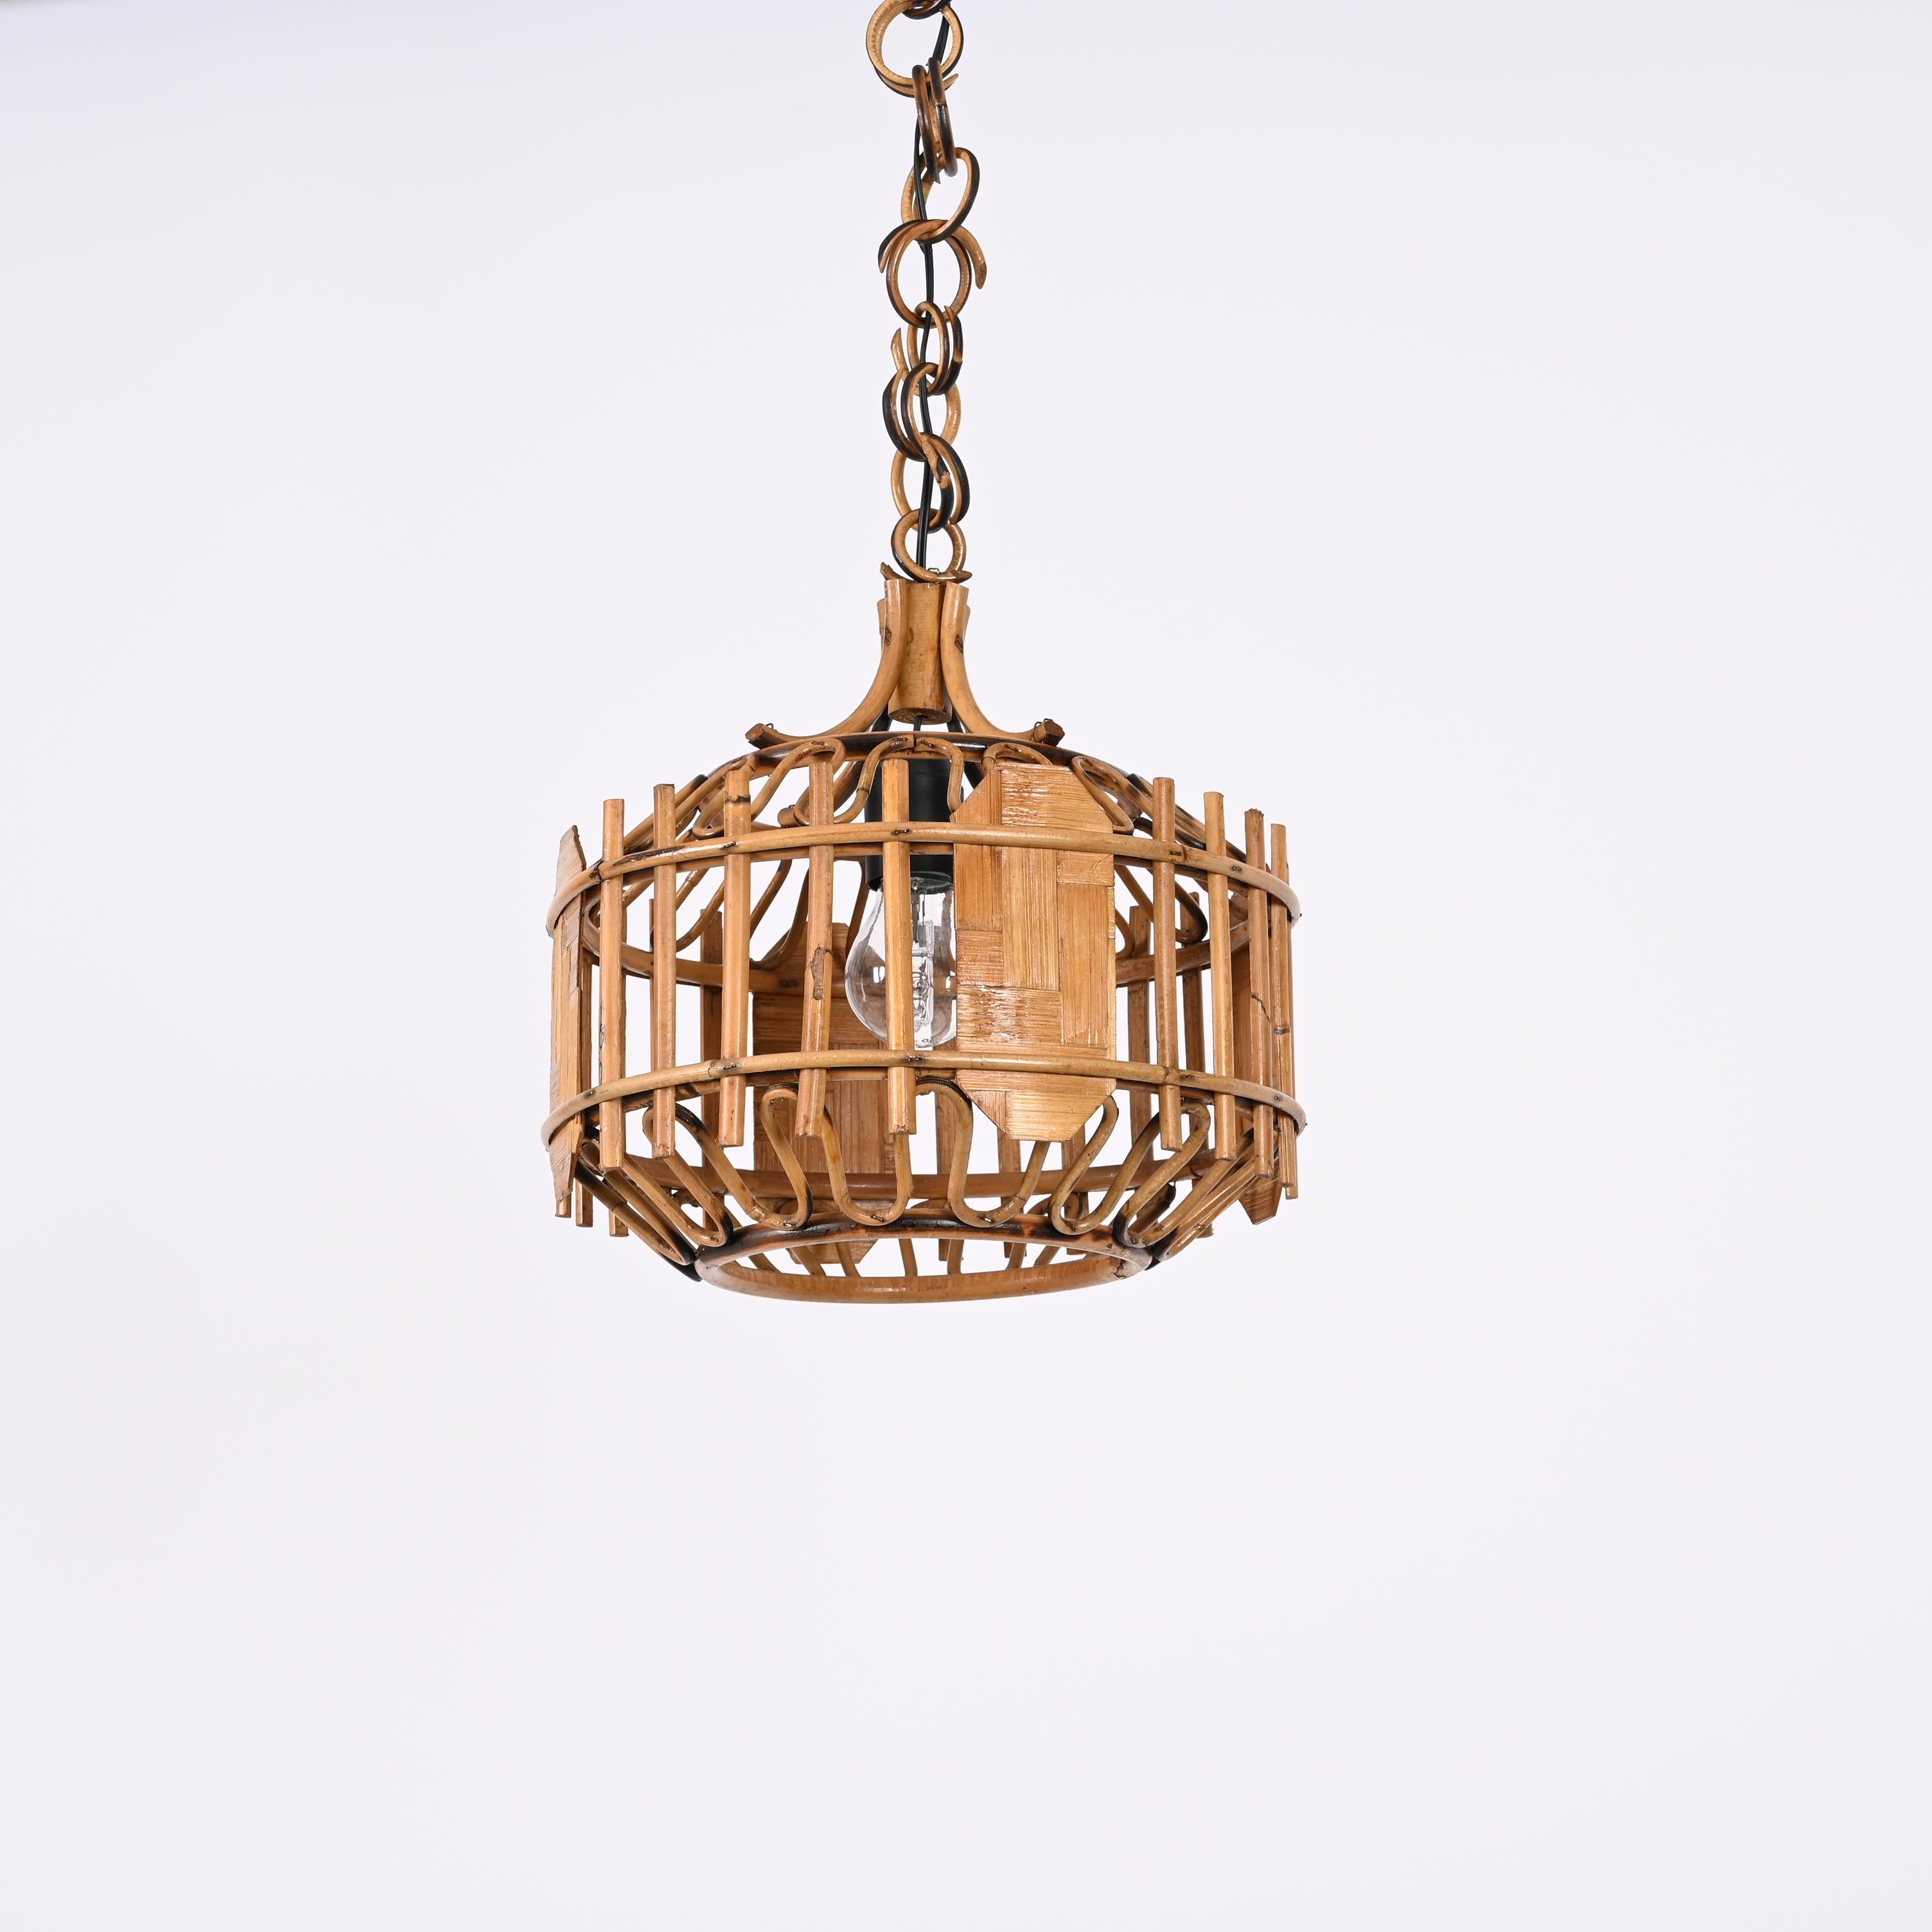 Midcentury French Riviera Bambo and Rattan Rounded Italian Chandelier, 1960s For Sale 4